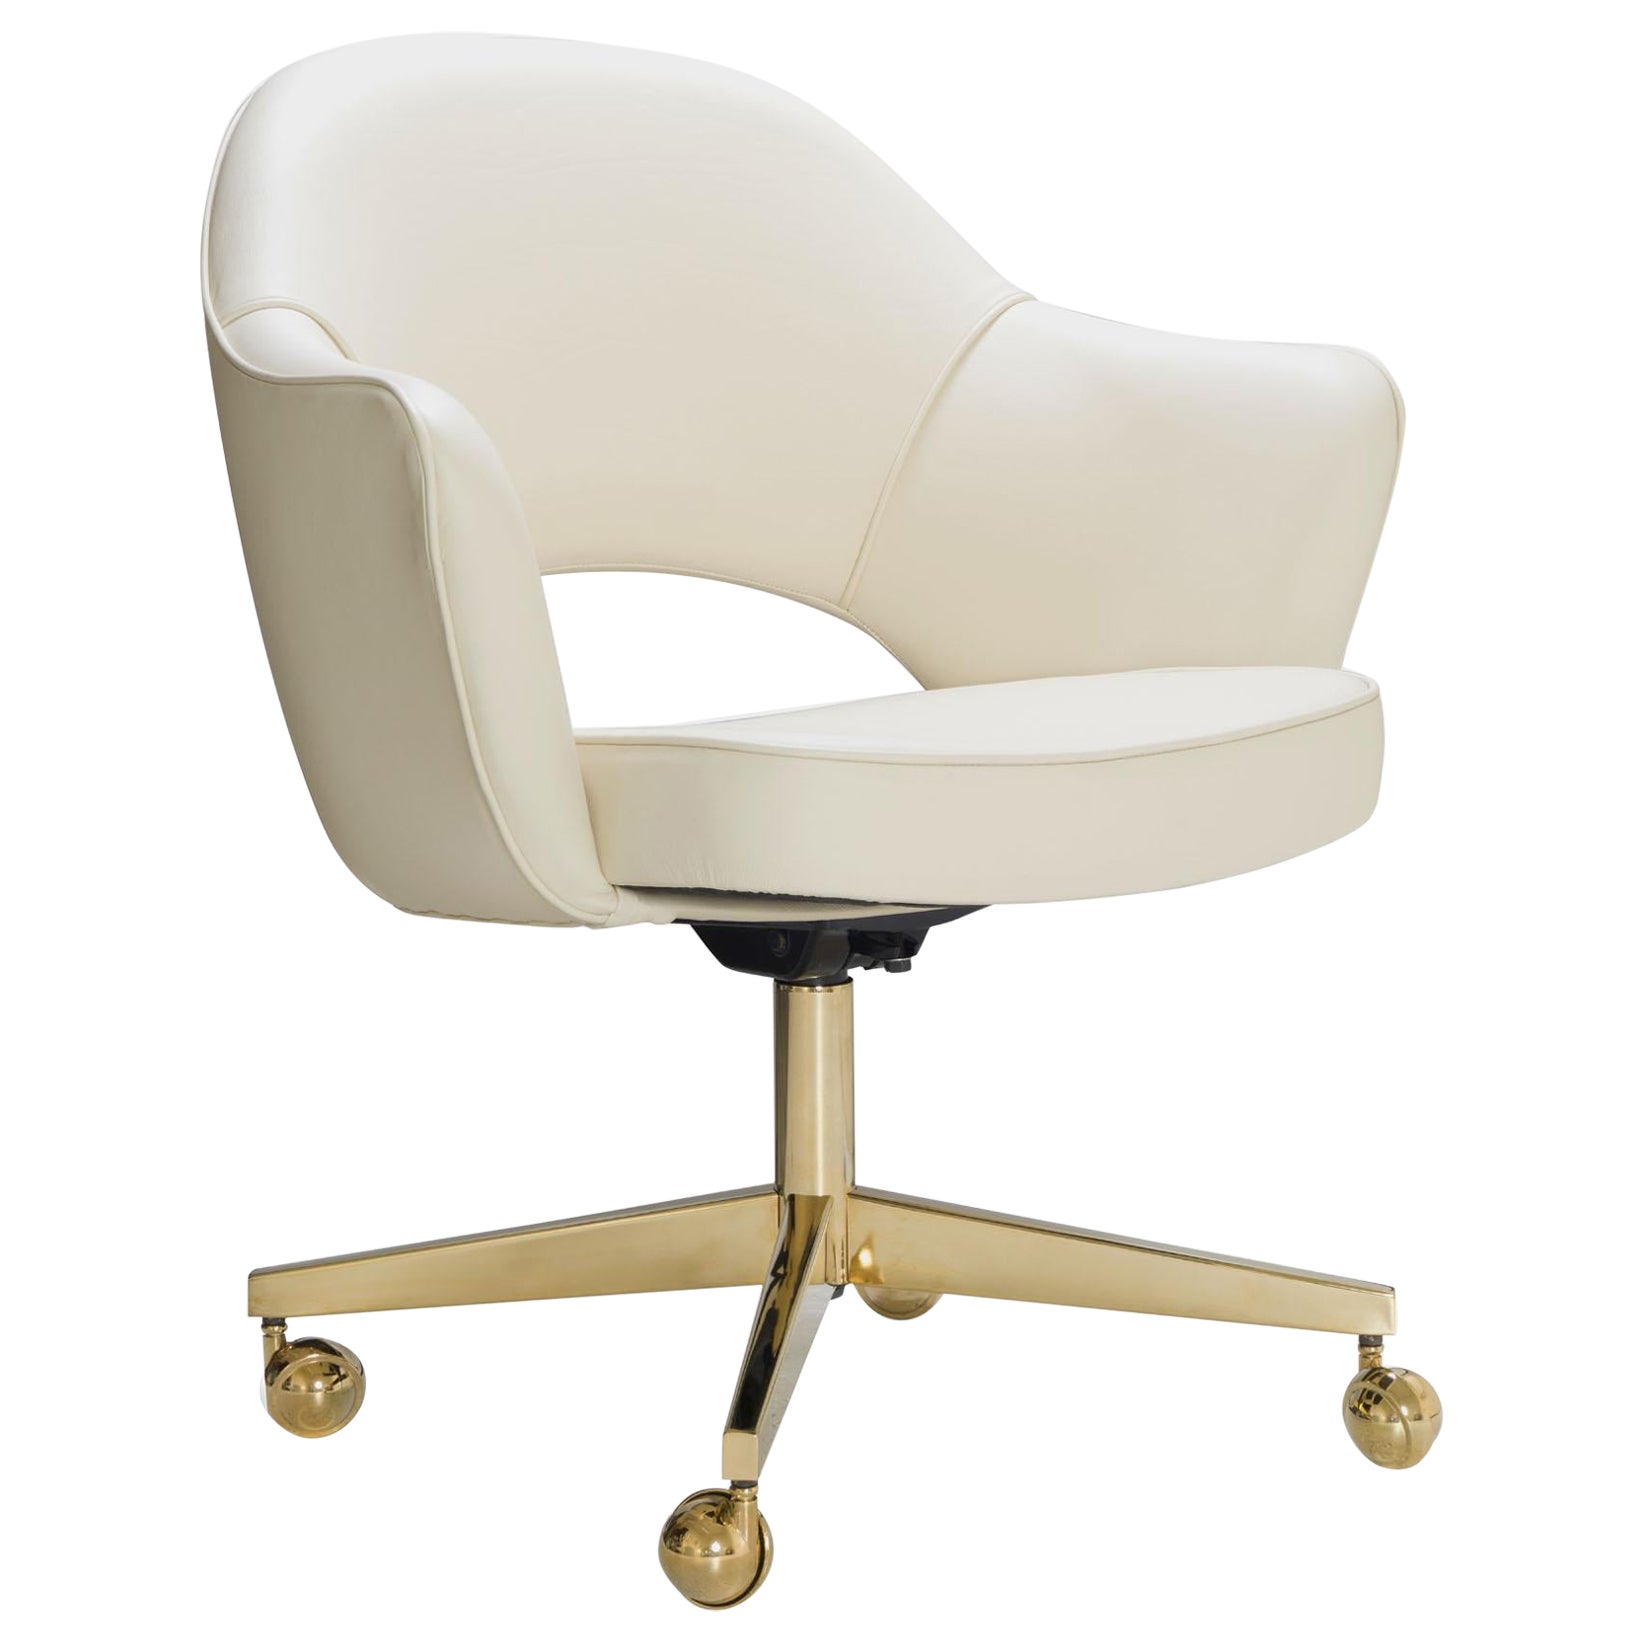 Saarinen Executive Armchair in Creme Leather on Swivel Base, Gold Edition